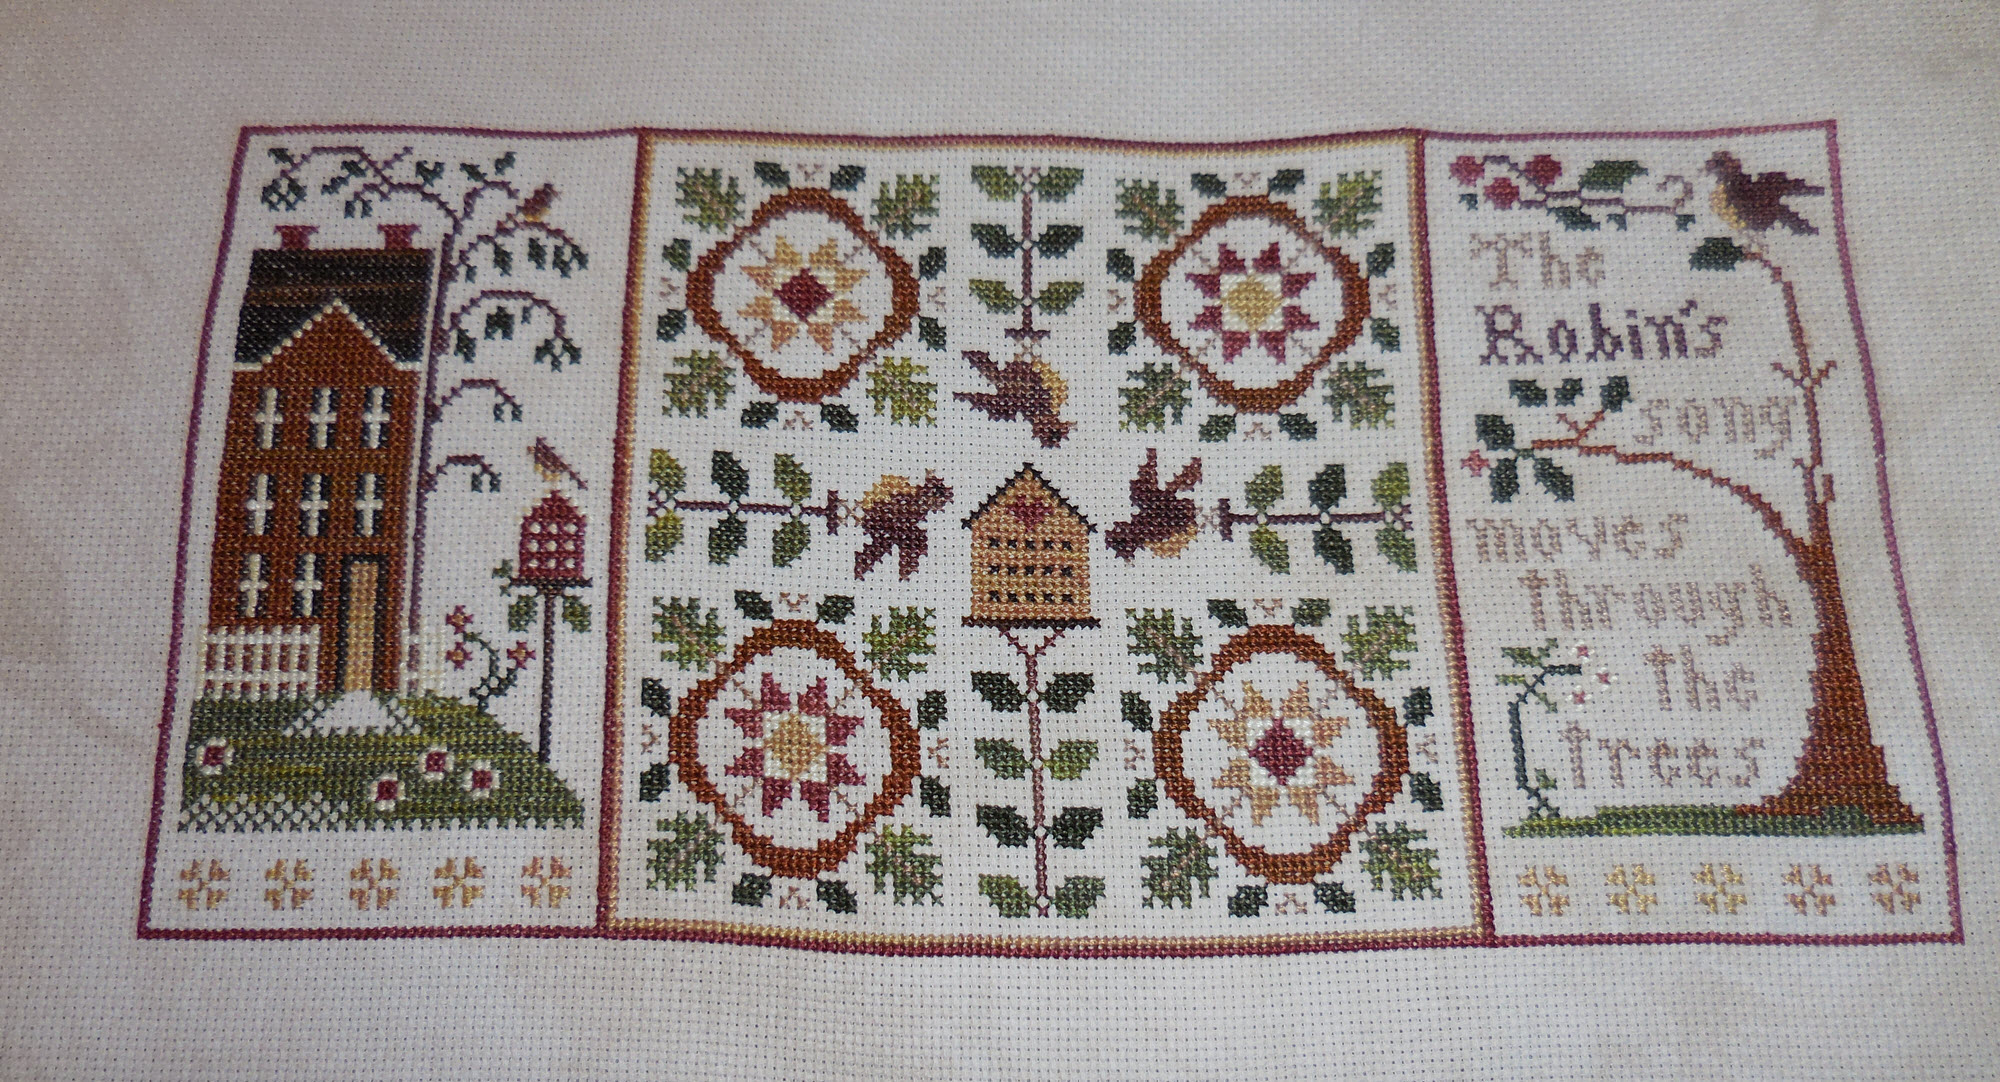 Robin’s Song by Little House Needleworks.